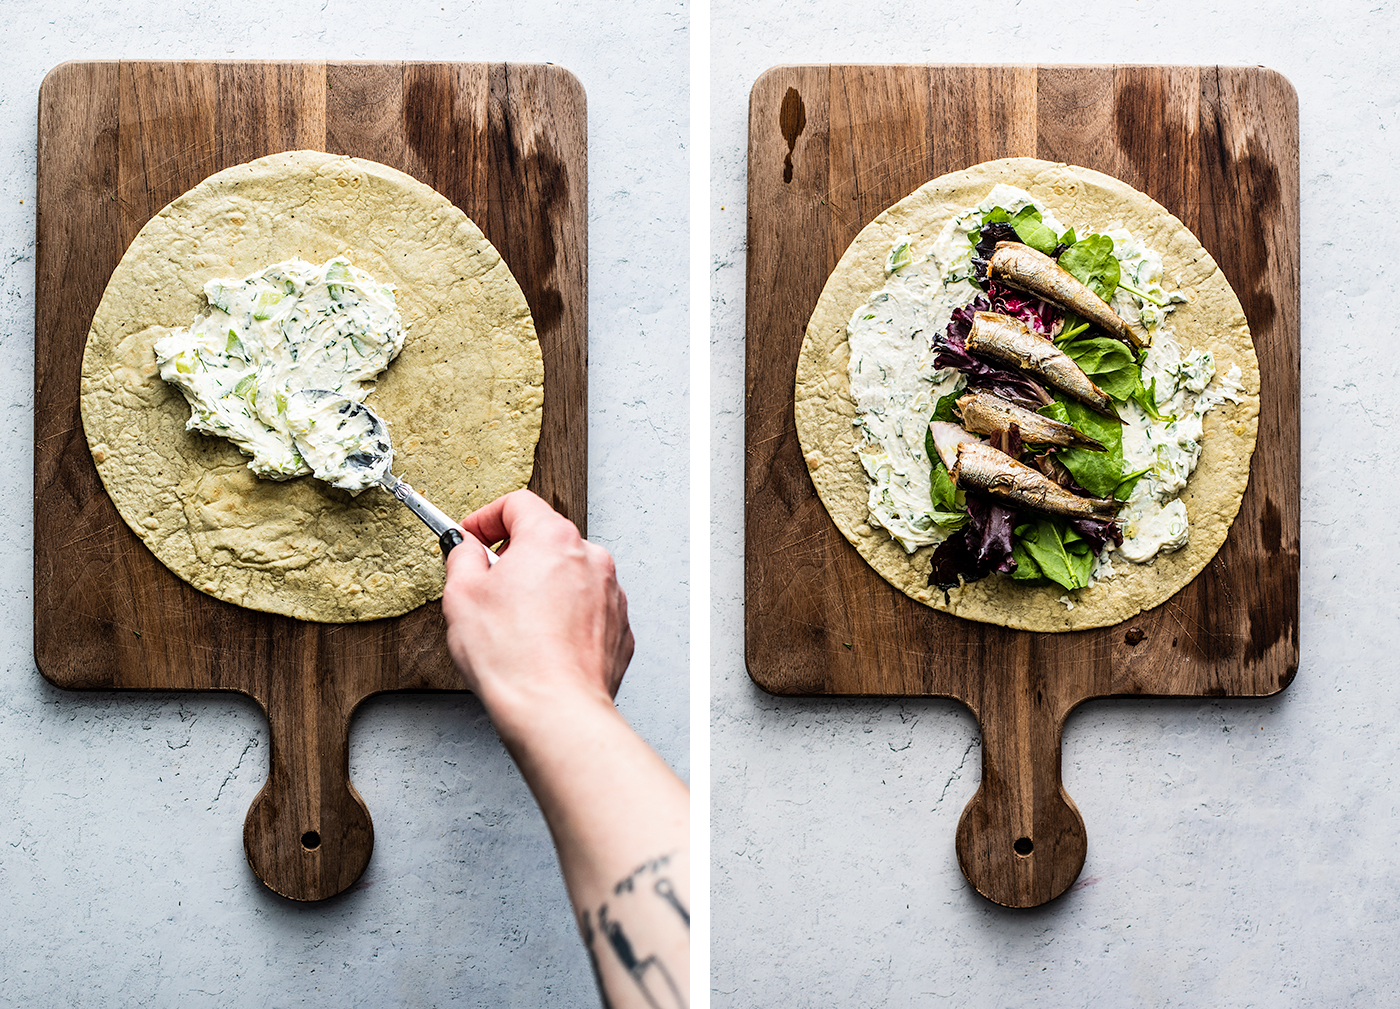 Left: tortilla on a wooden board with mixture being spread onto it; Right: Tortilla topped with mixed greens and sardine fillets.